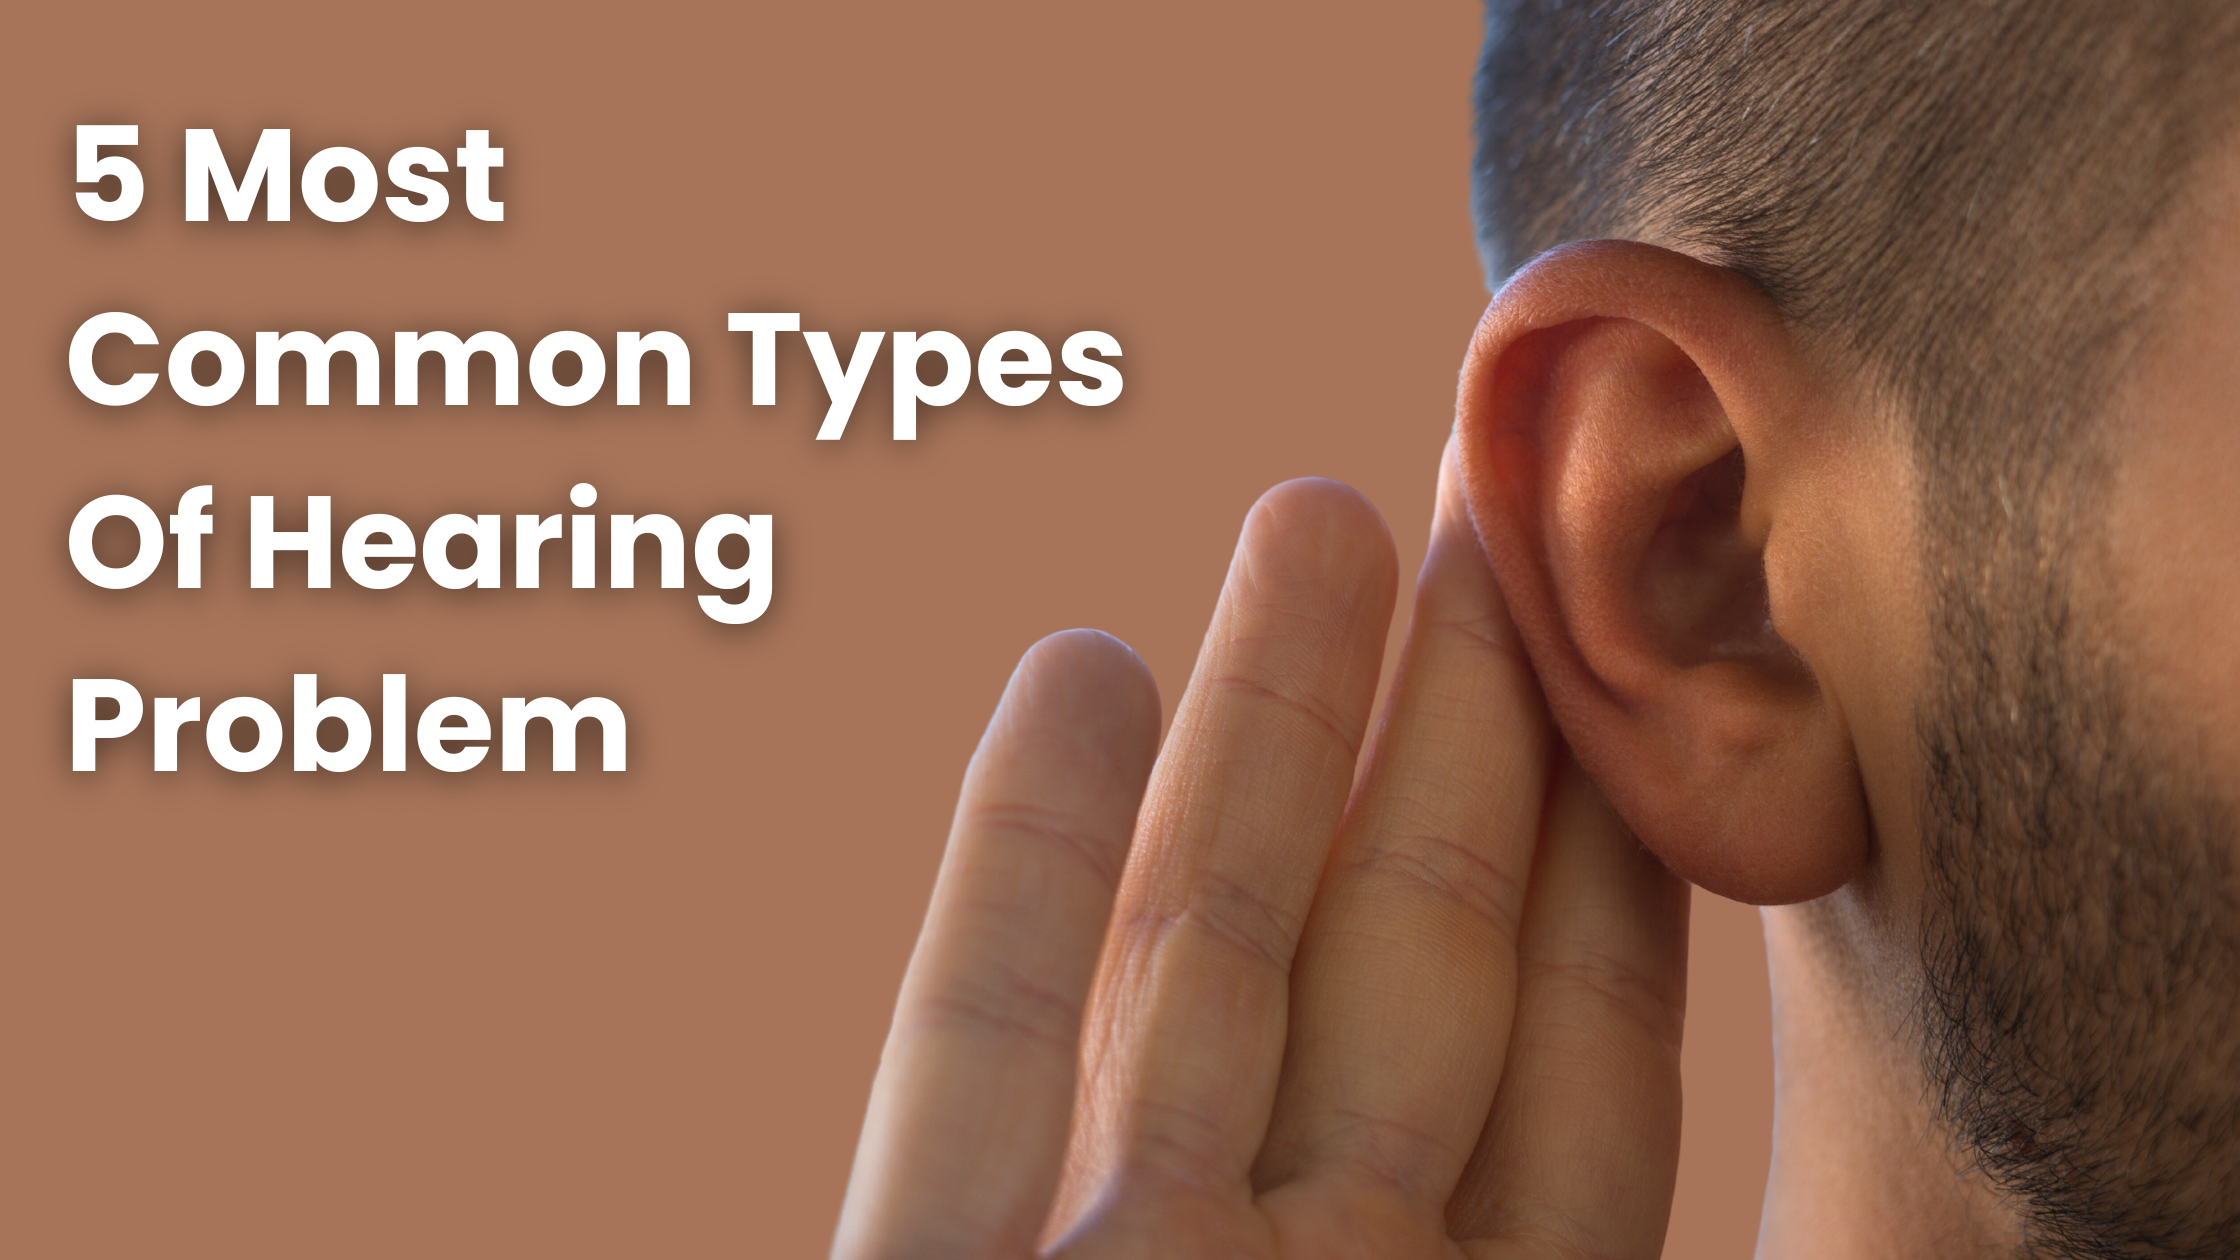 5 Most Common Types Of Hearing Problem